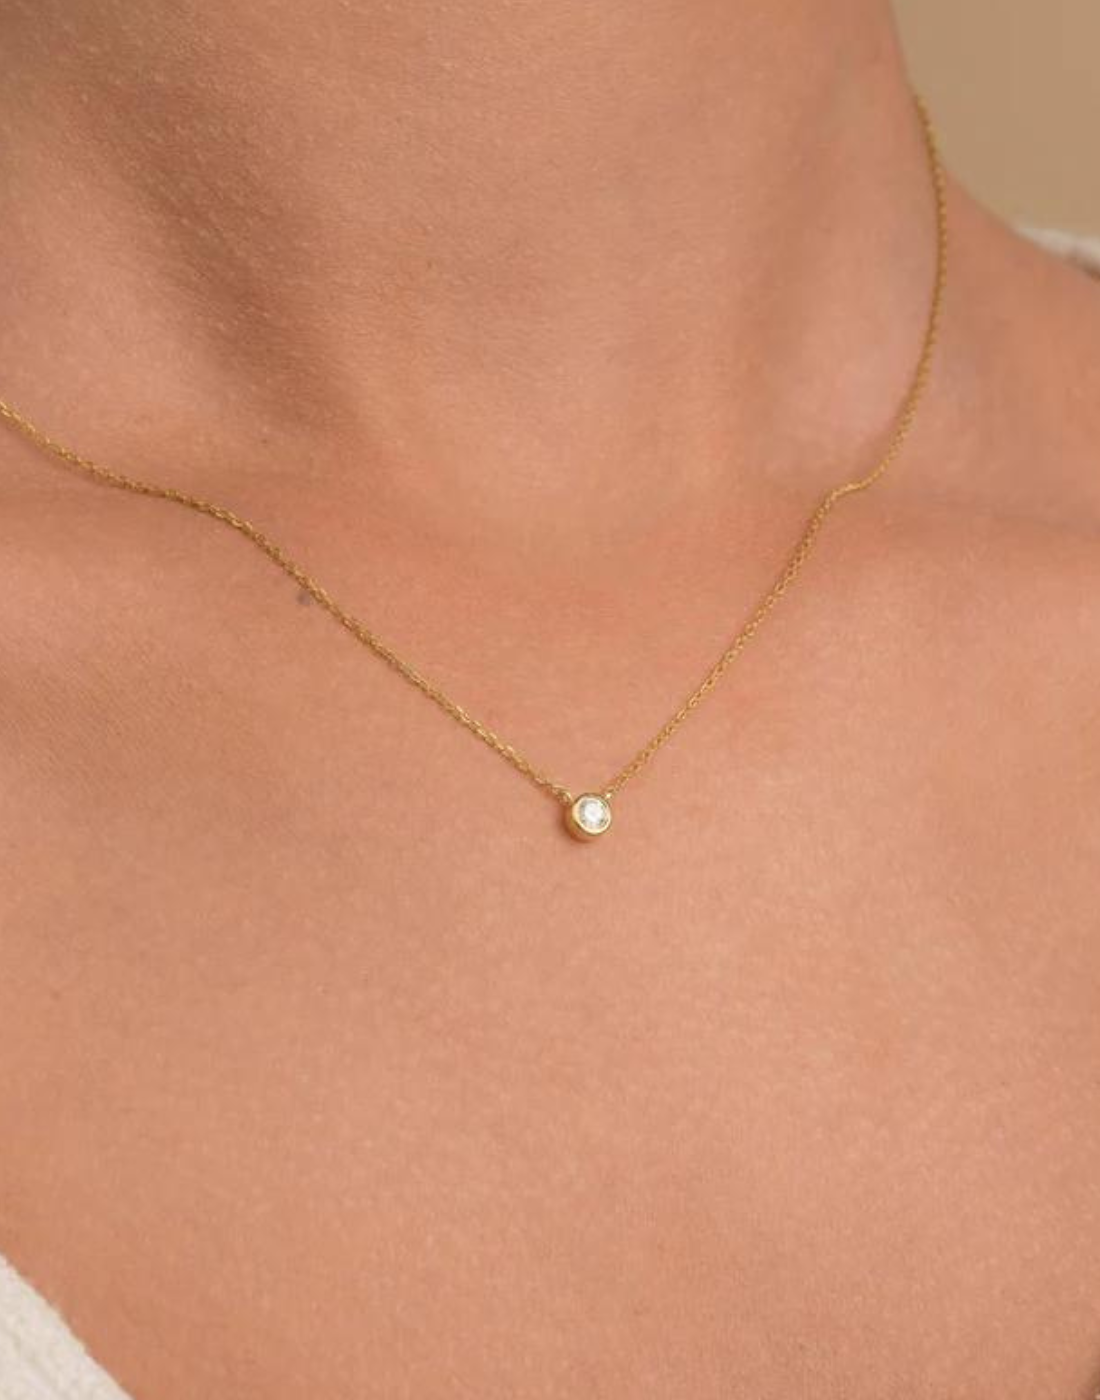 Delicate Drop heart Necklace for special university student in Pakistan in sale gold plated artificial necklace